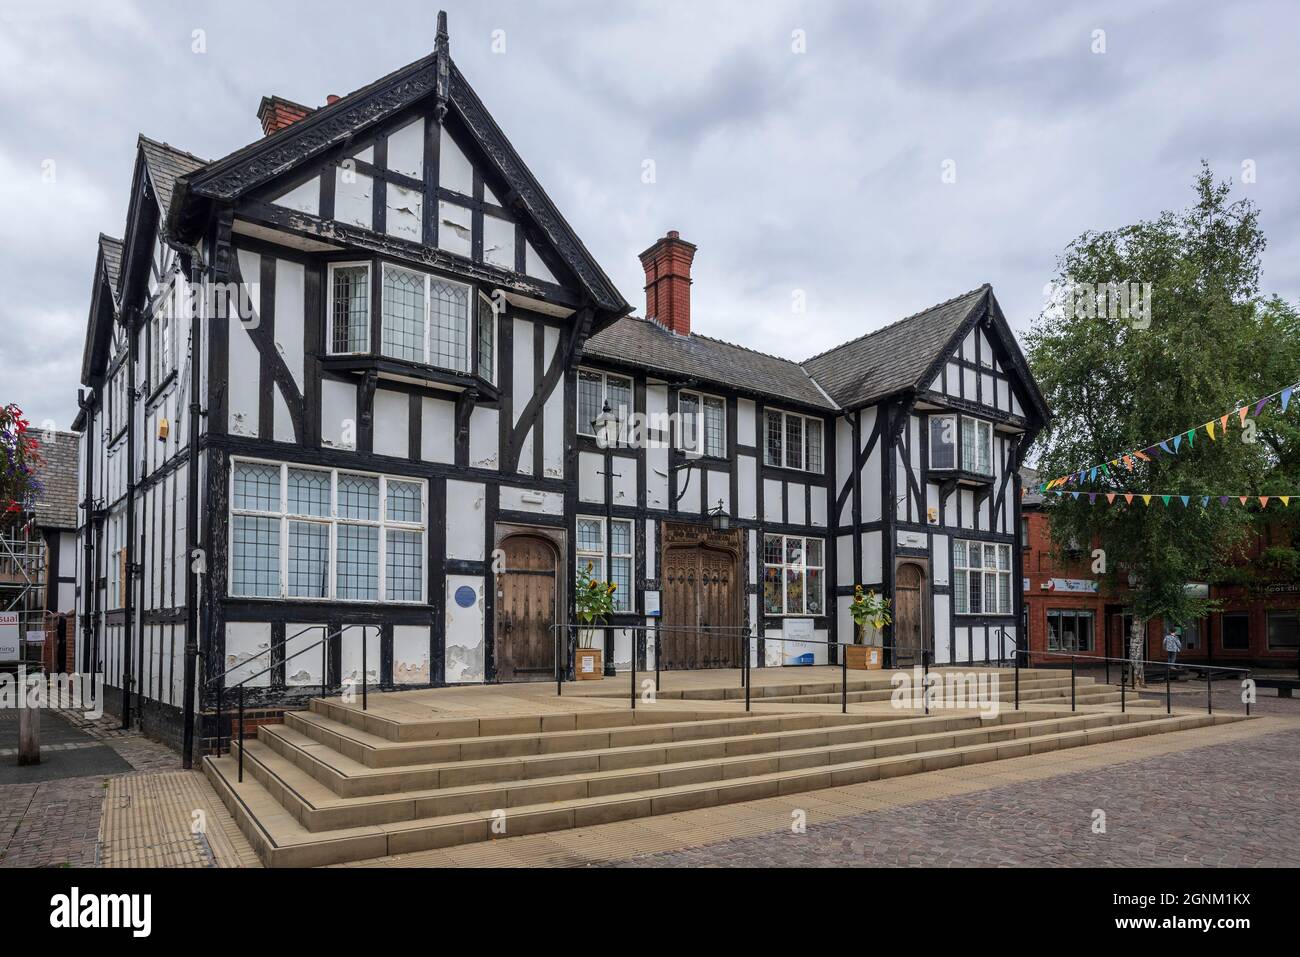 The Brunner public library and salt museum from 1909 in the centre of Northwich. Stock Photo